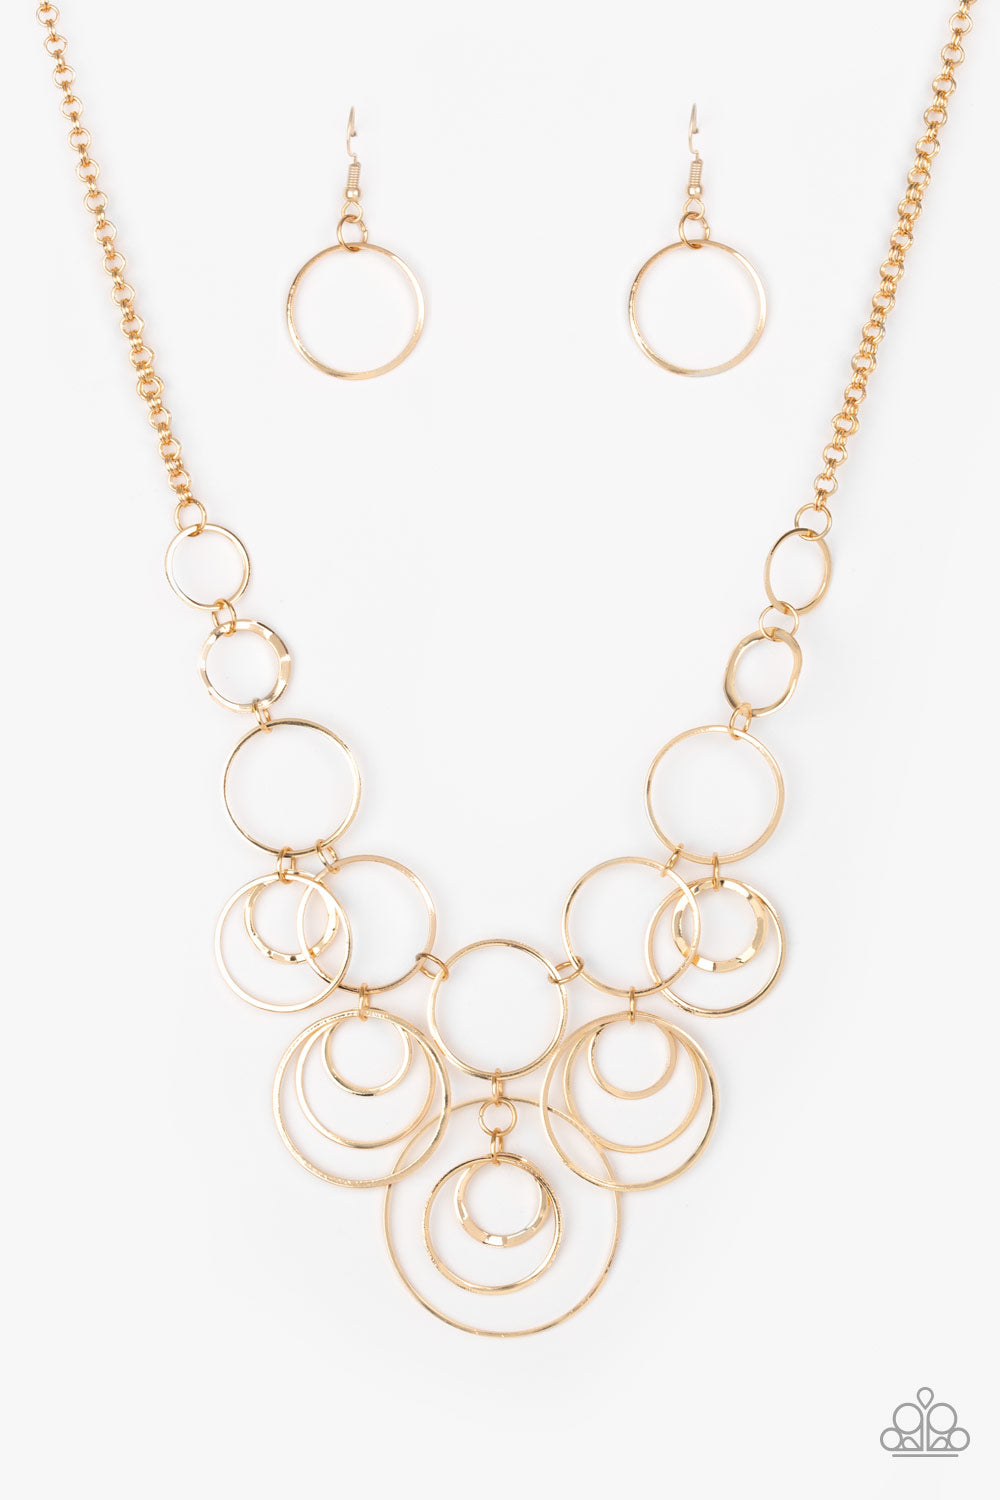 Paparazzi necklace - Break The Cycle - Gold